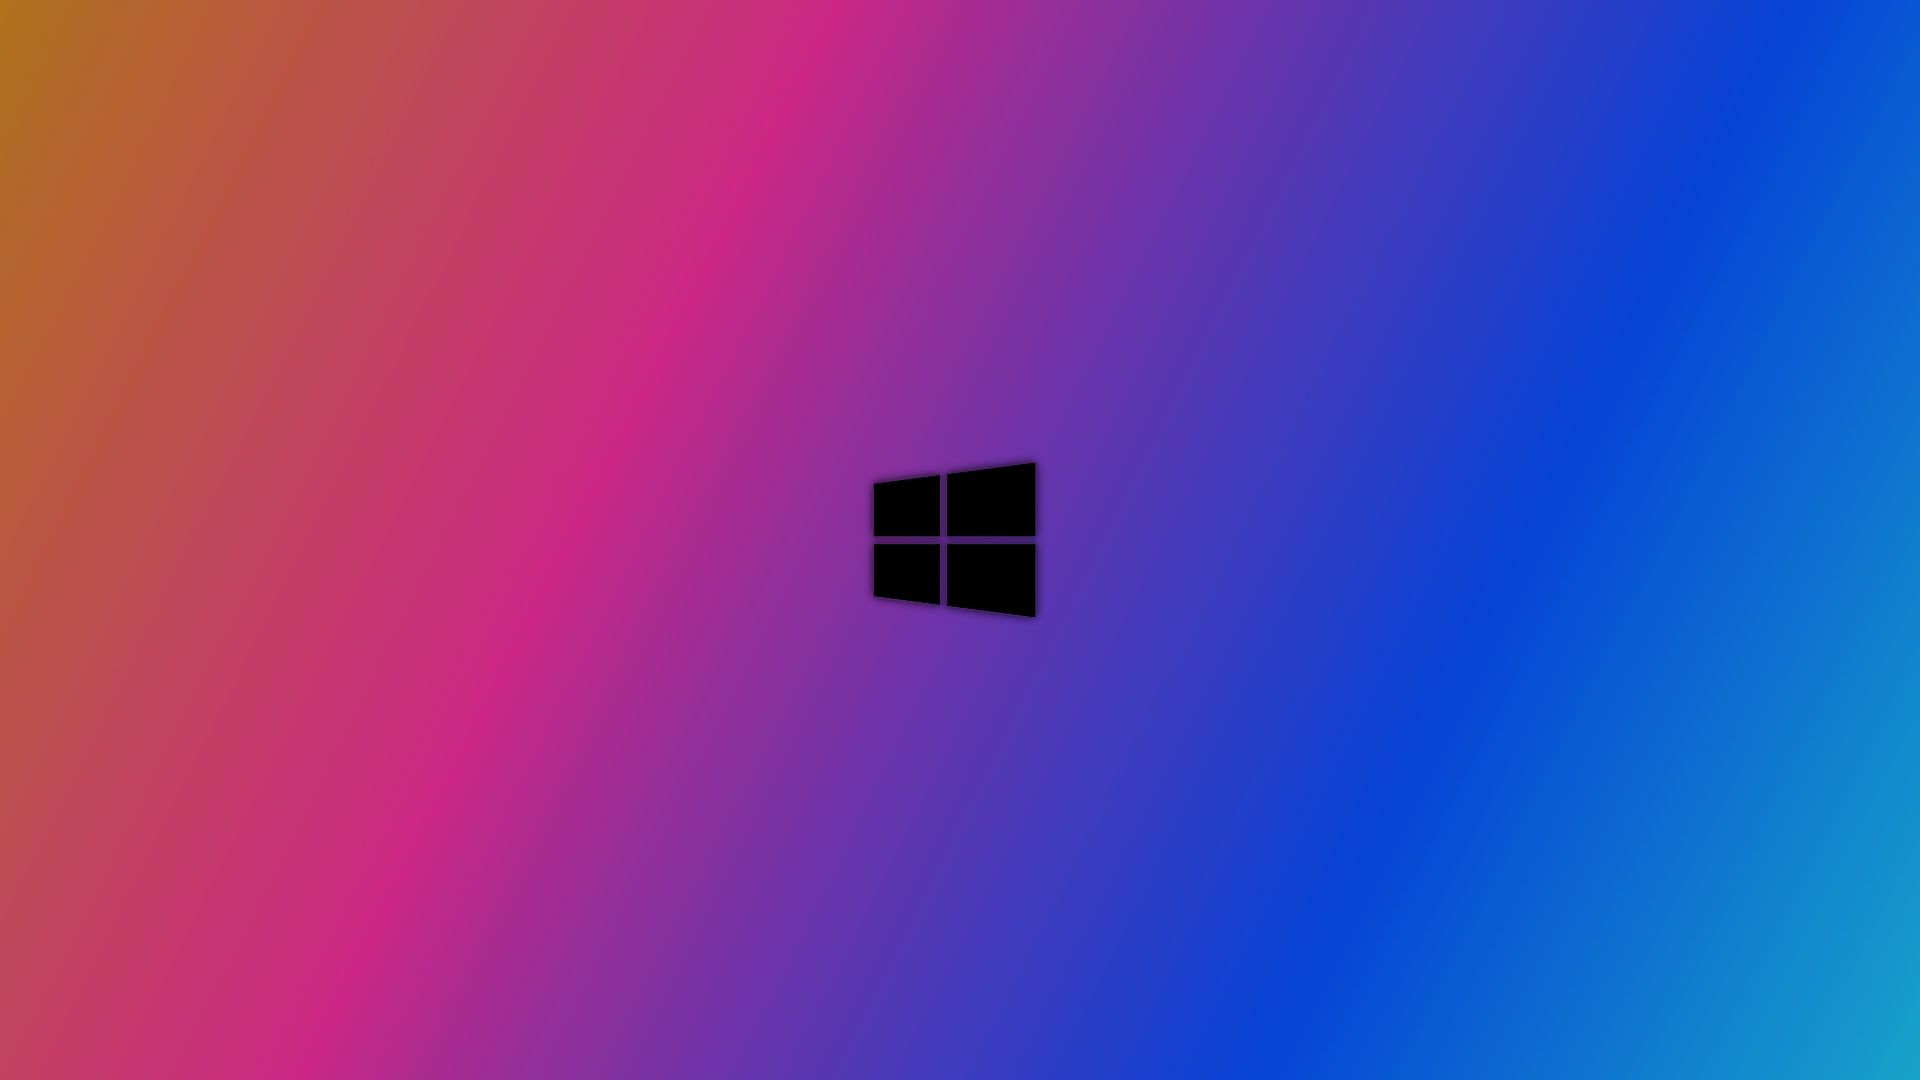 Windows 10 #blurred #colorful #logo #abstract P #wallpaper #hdwallpaper #desktop. Wallpaper windows Abstract wallpaper, Windows wallpaper